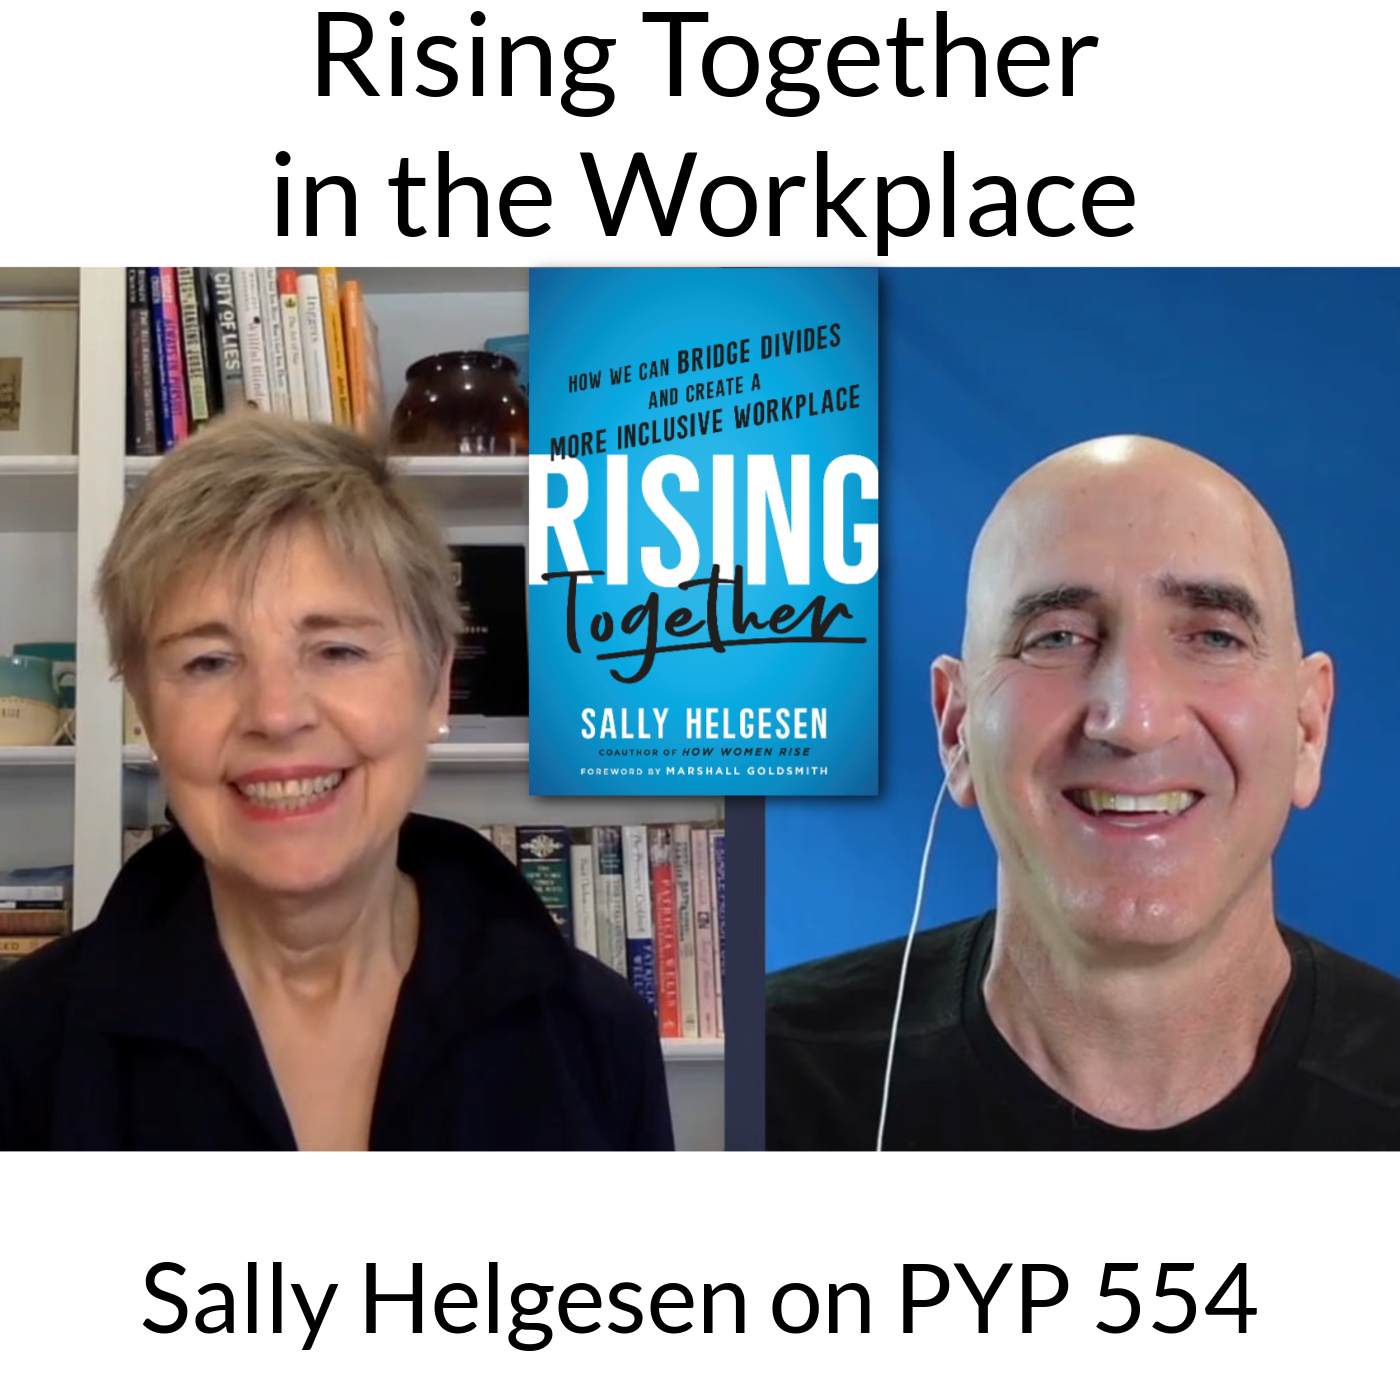 Rising Together in the Workplace: Sally Helgesen on PYP 554